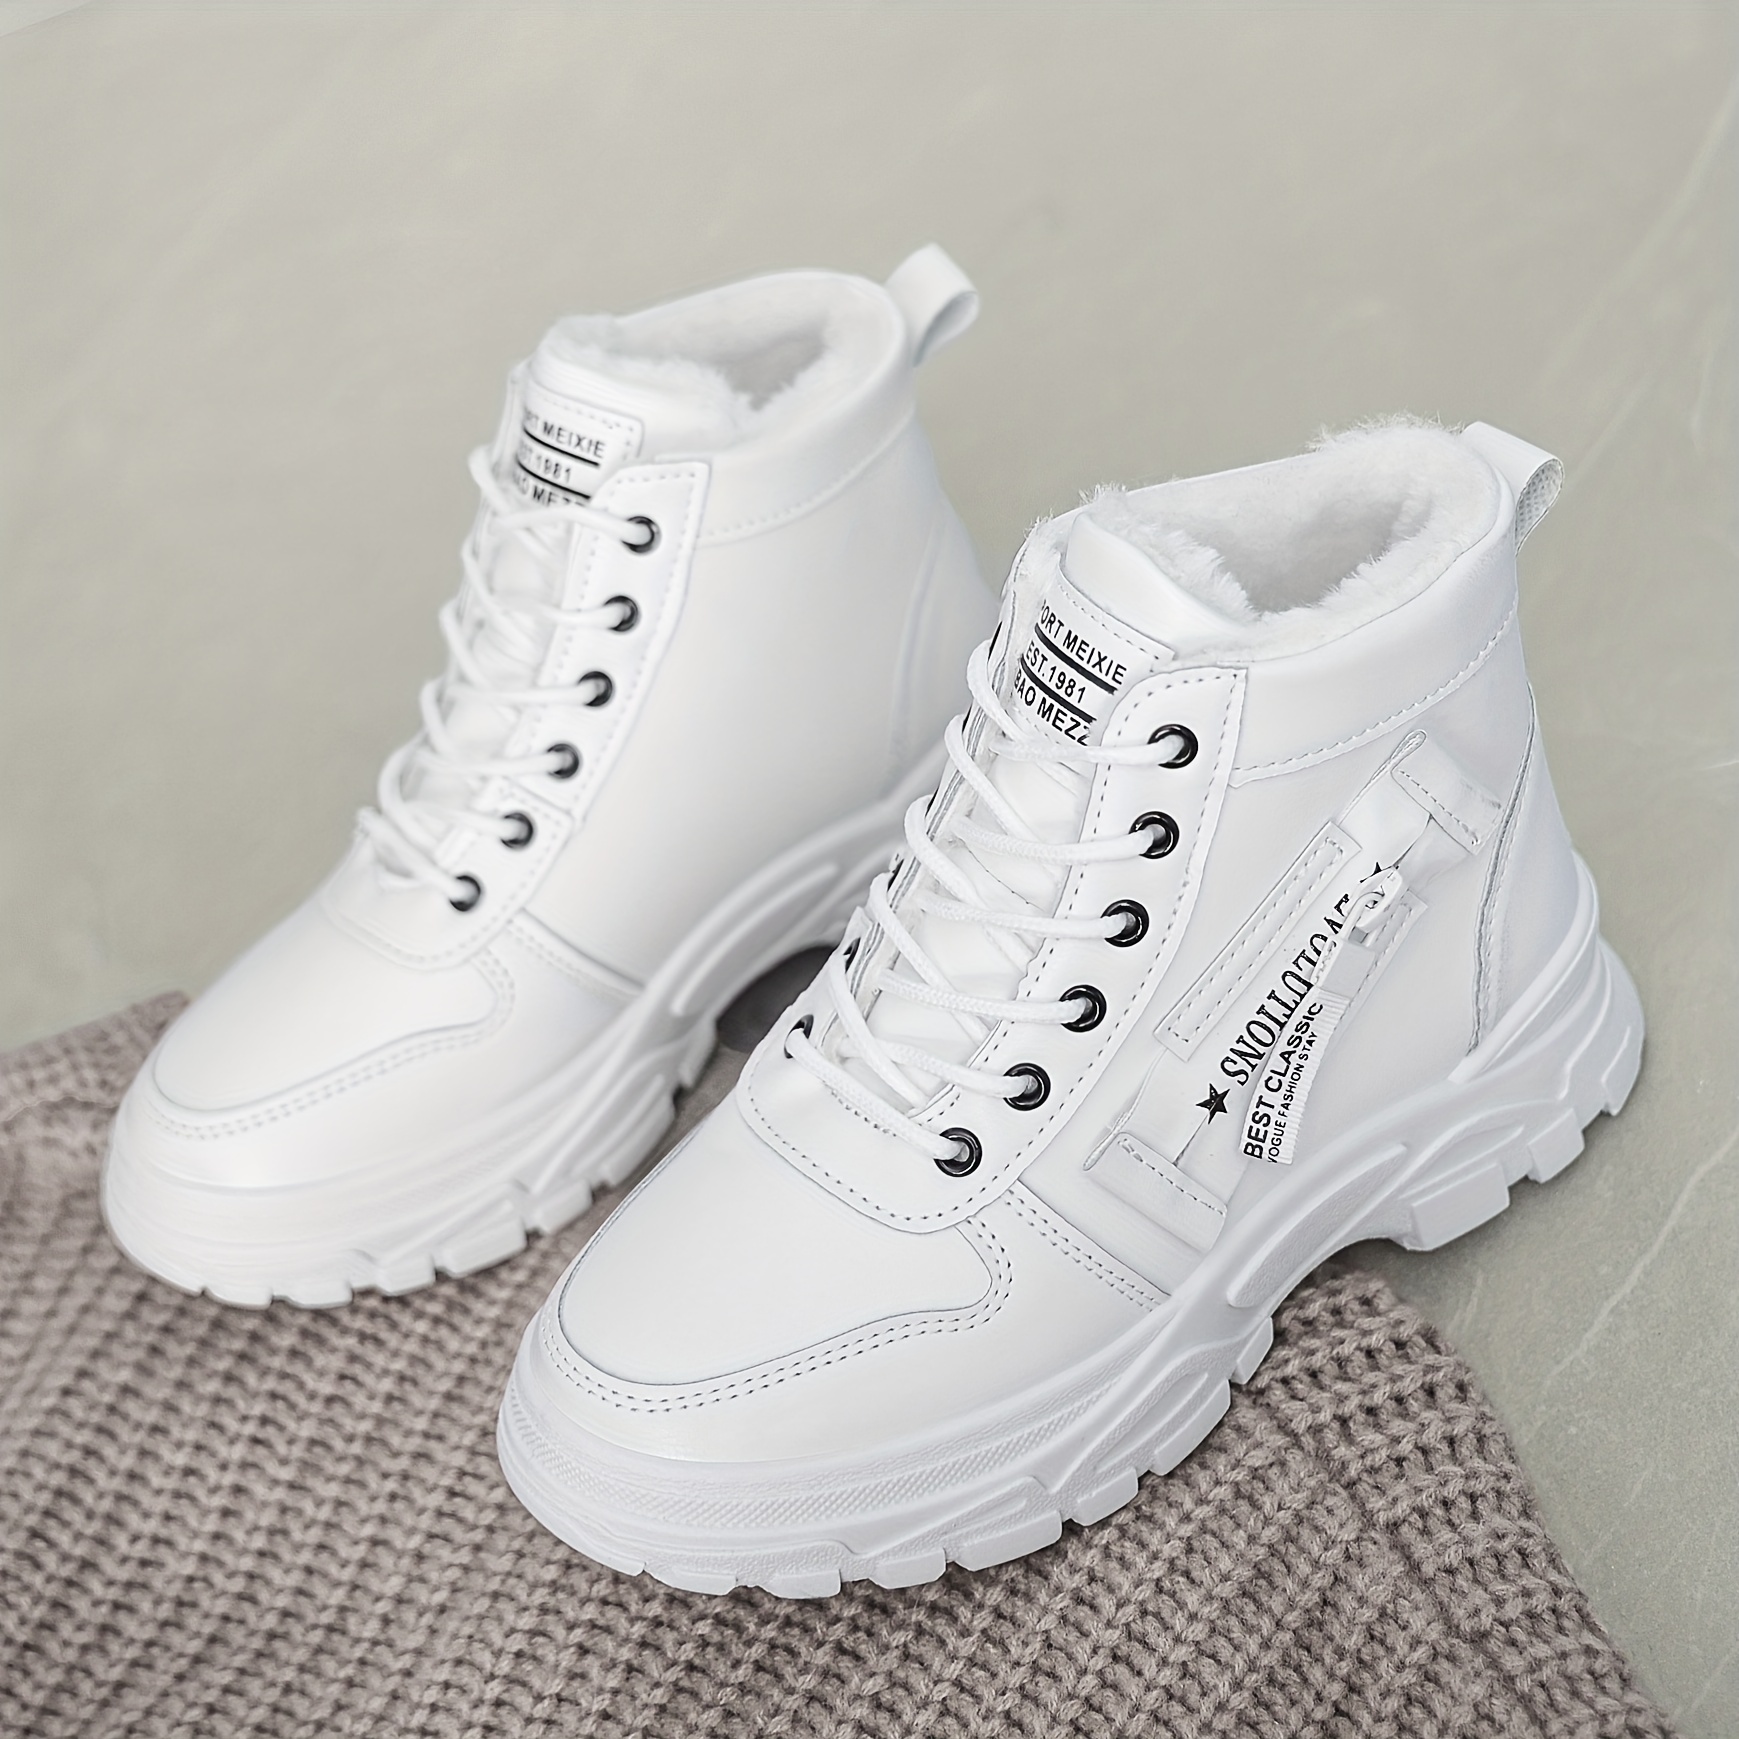 womens winter high top sneakers casual lace up plush lined boots comfortable side zipper short boots details 7